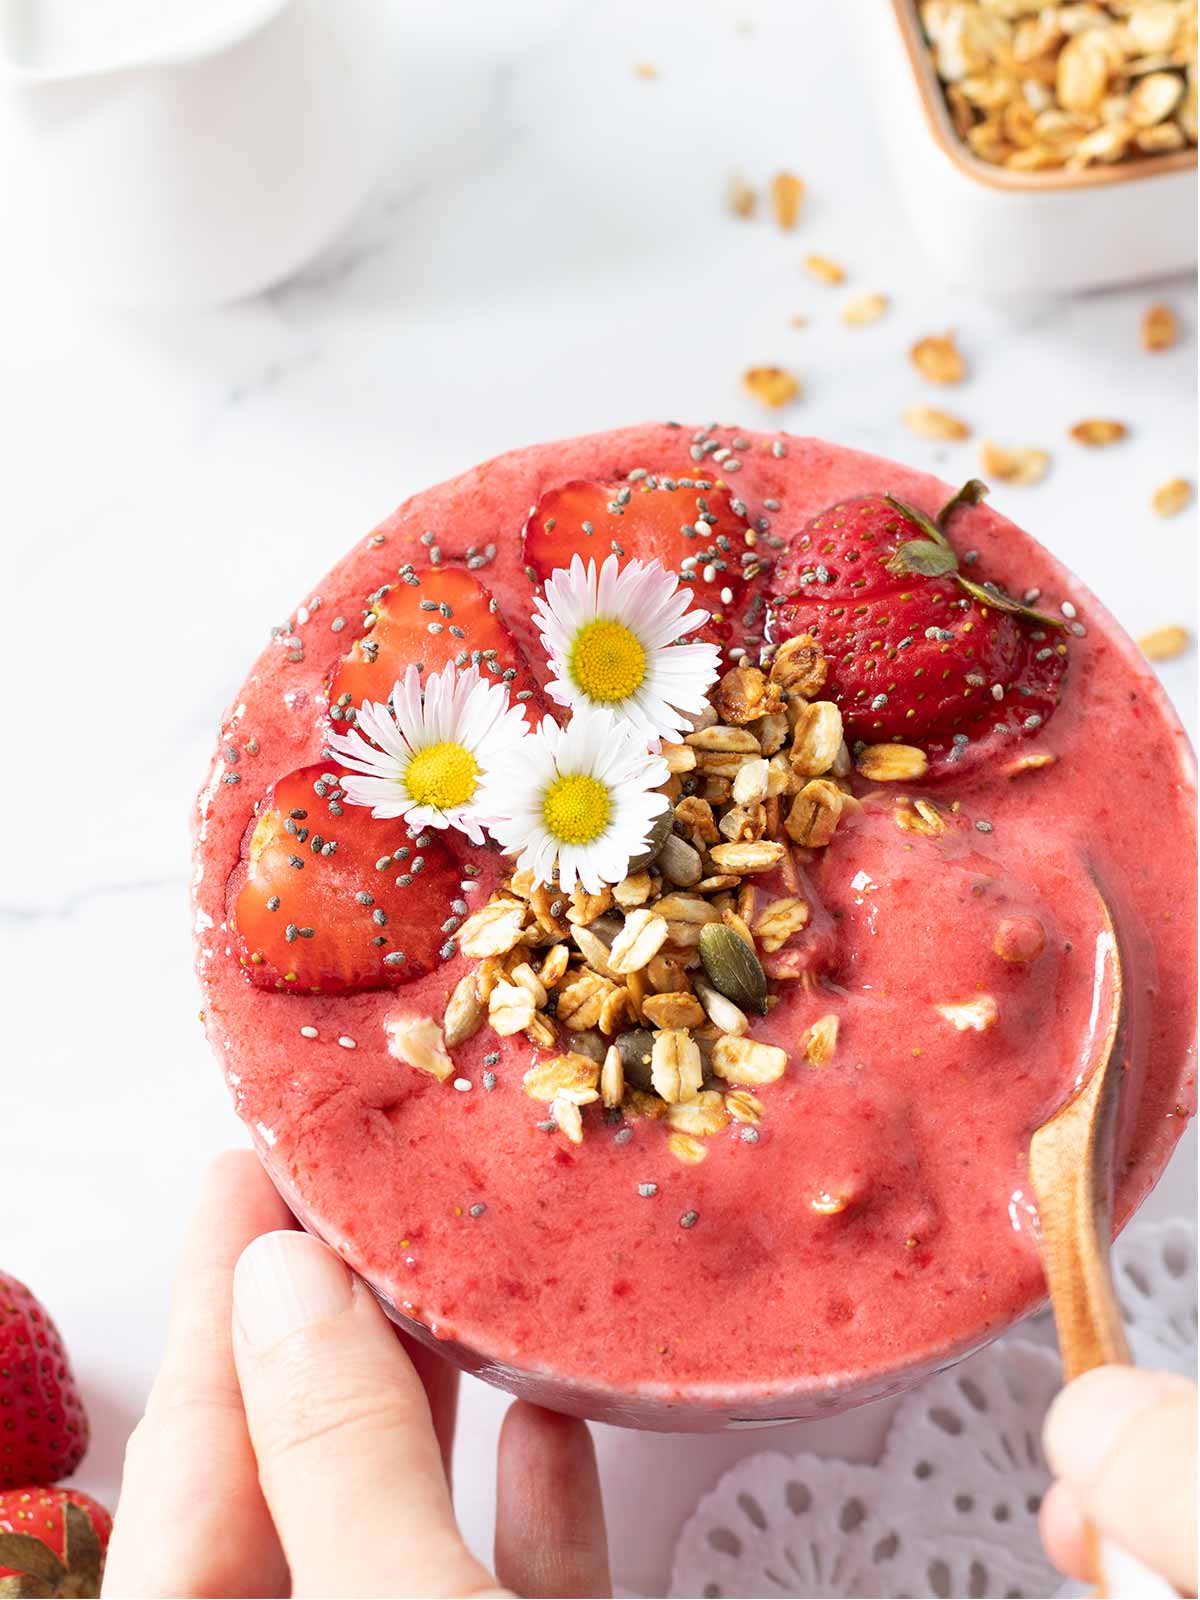 Super thick and cold no banana strawberry smoothie bowl topped with fresh strawberries, healthy homemade granola and flowers as an easy vegan summer dessert or breakfast